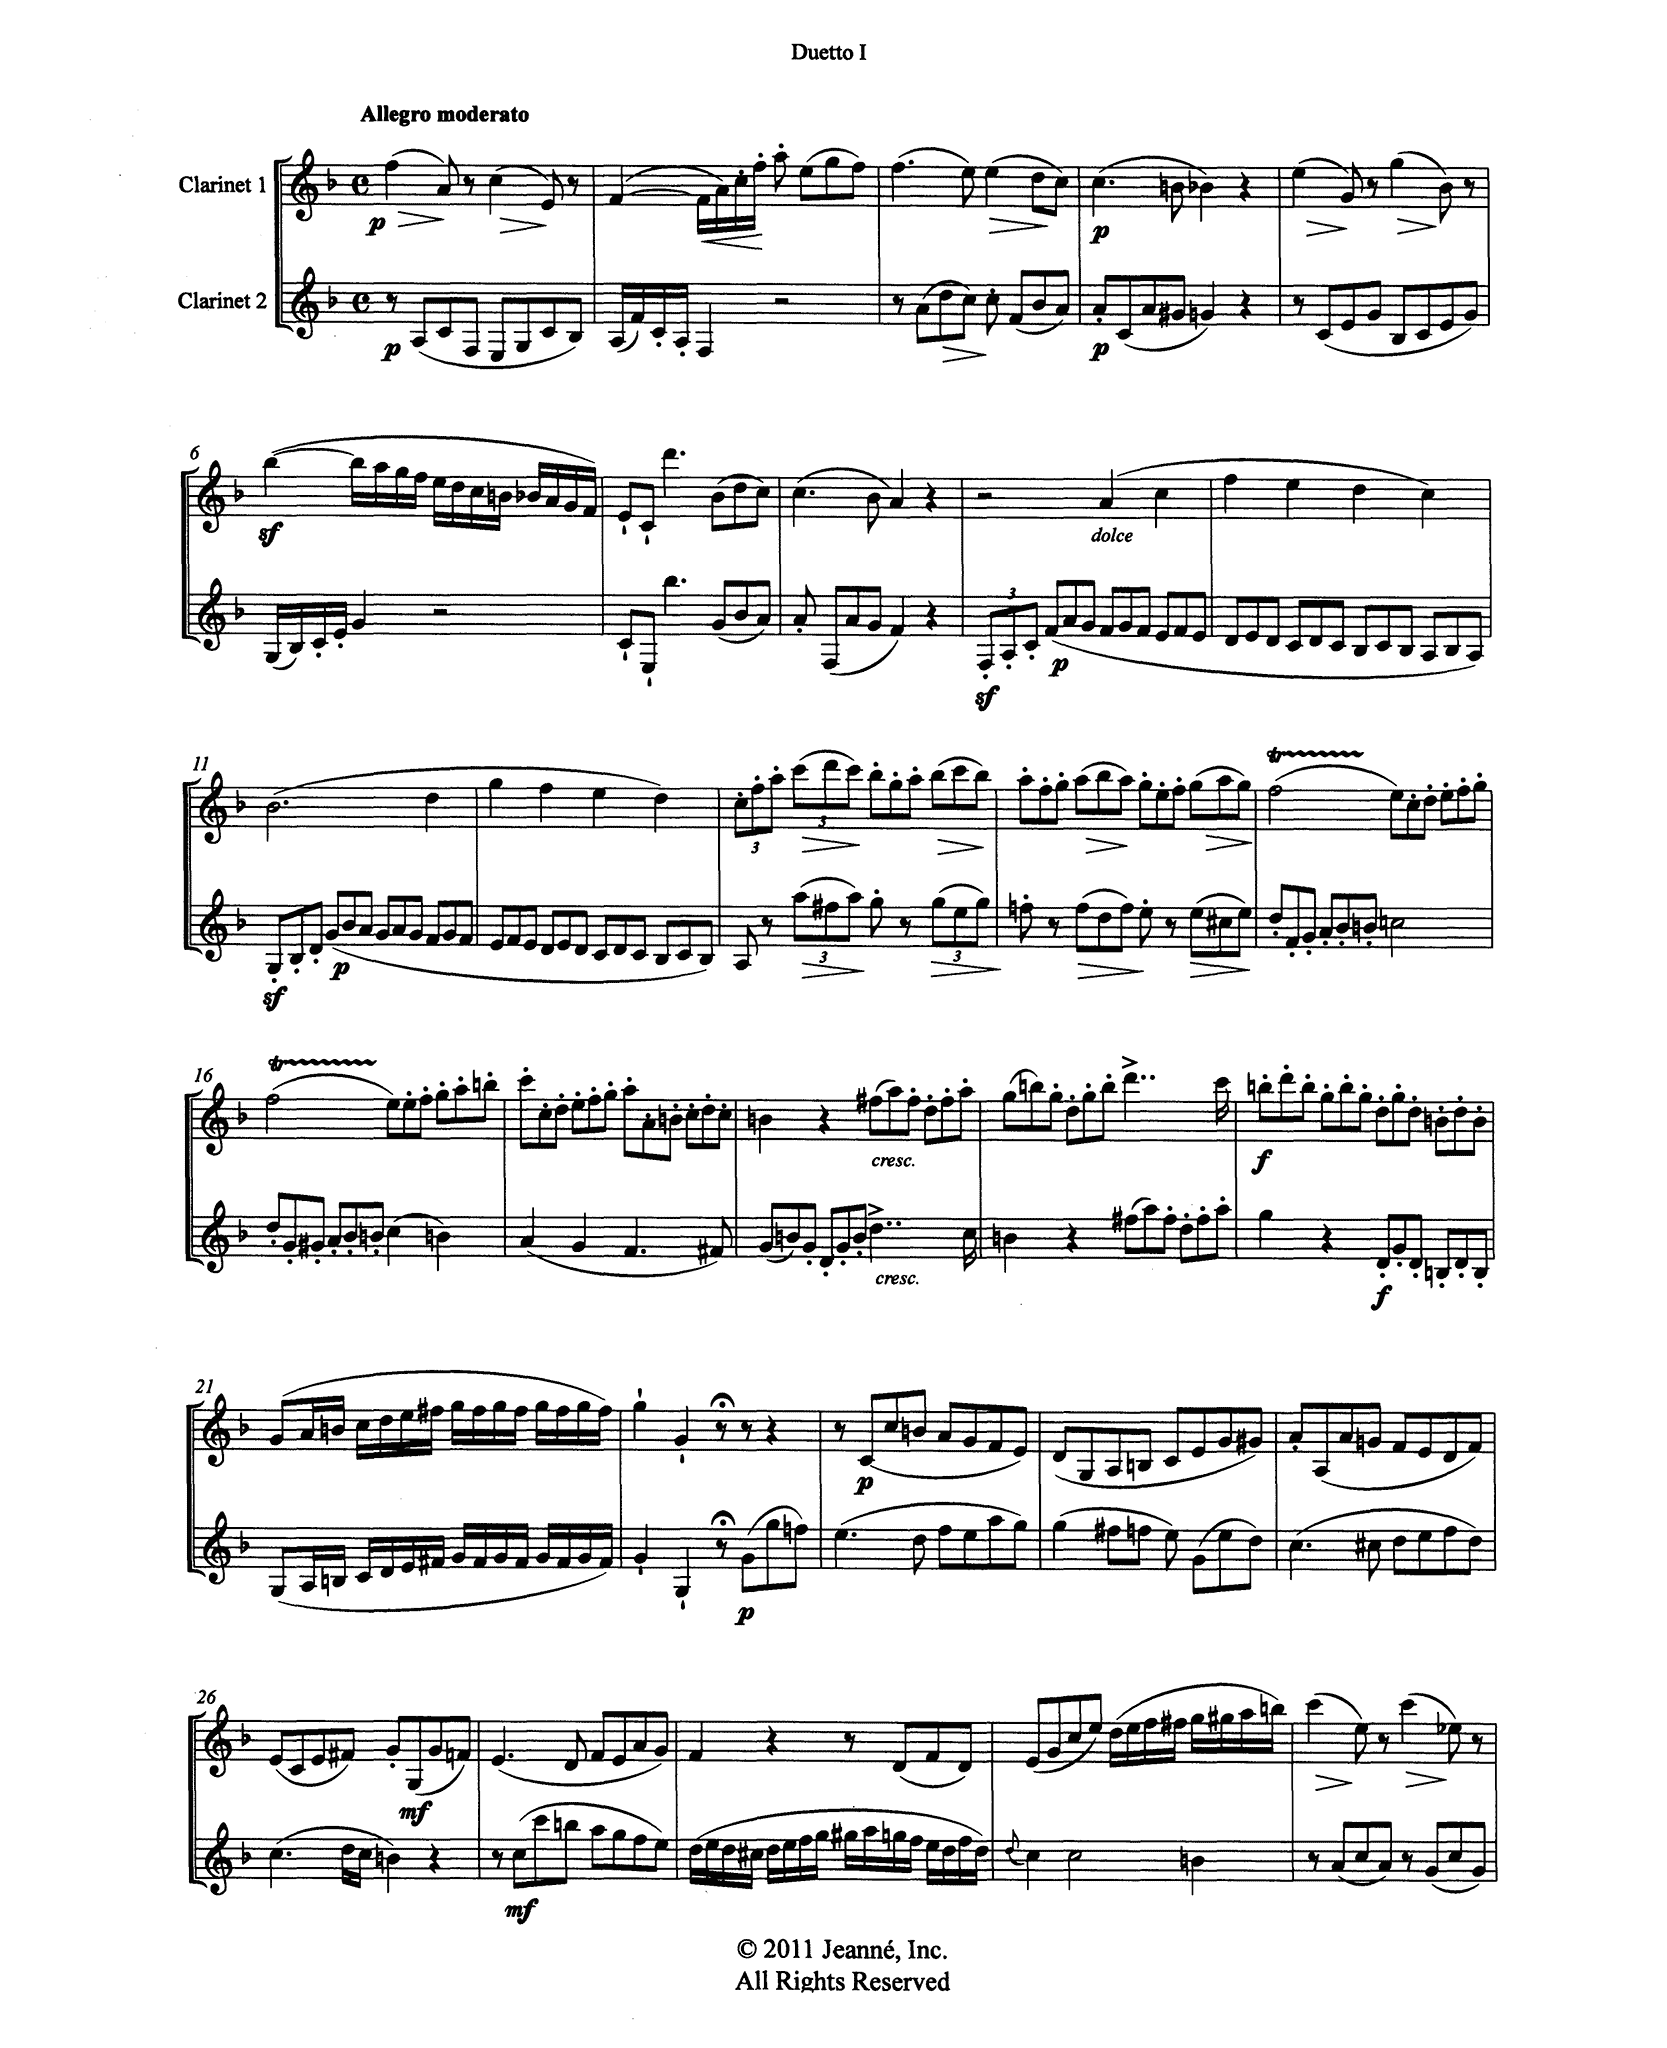 Crusell Clarinet Duet No. 1 in F Major score - Movement 1